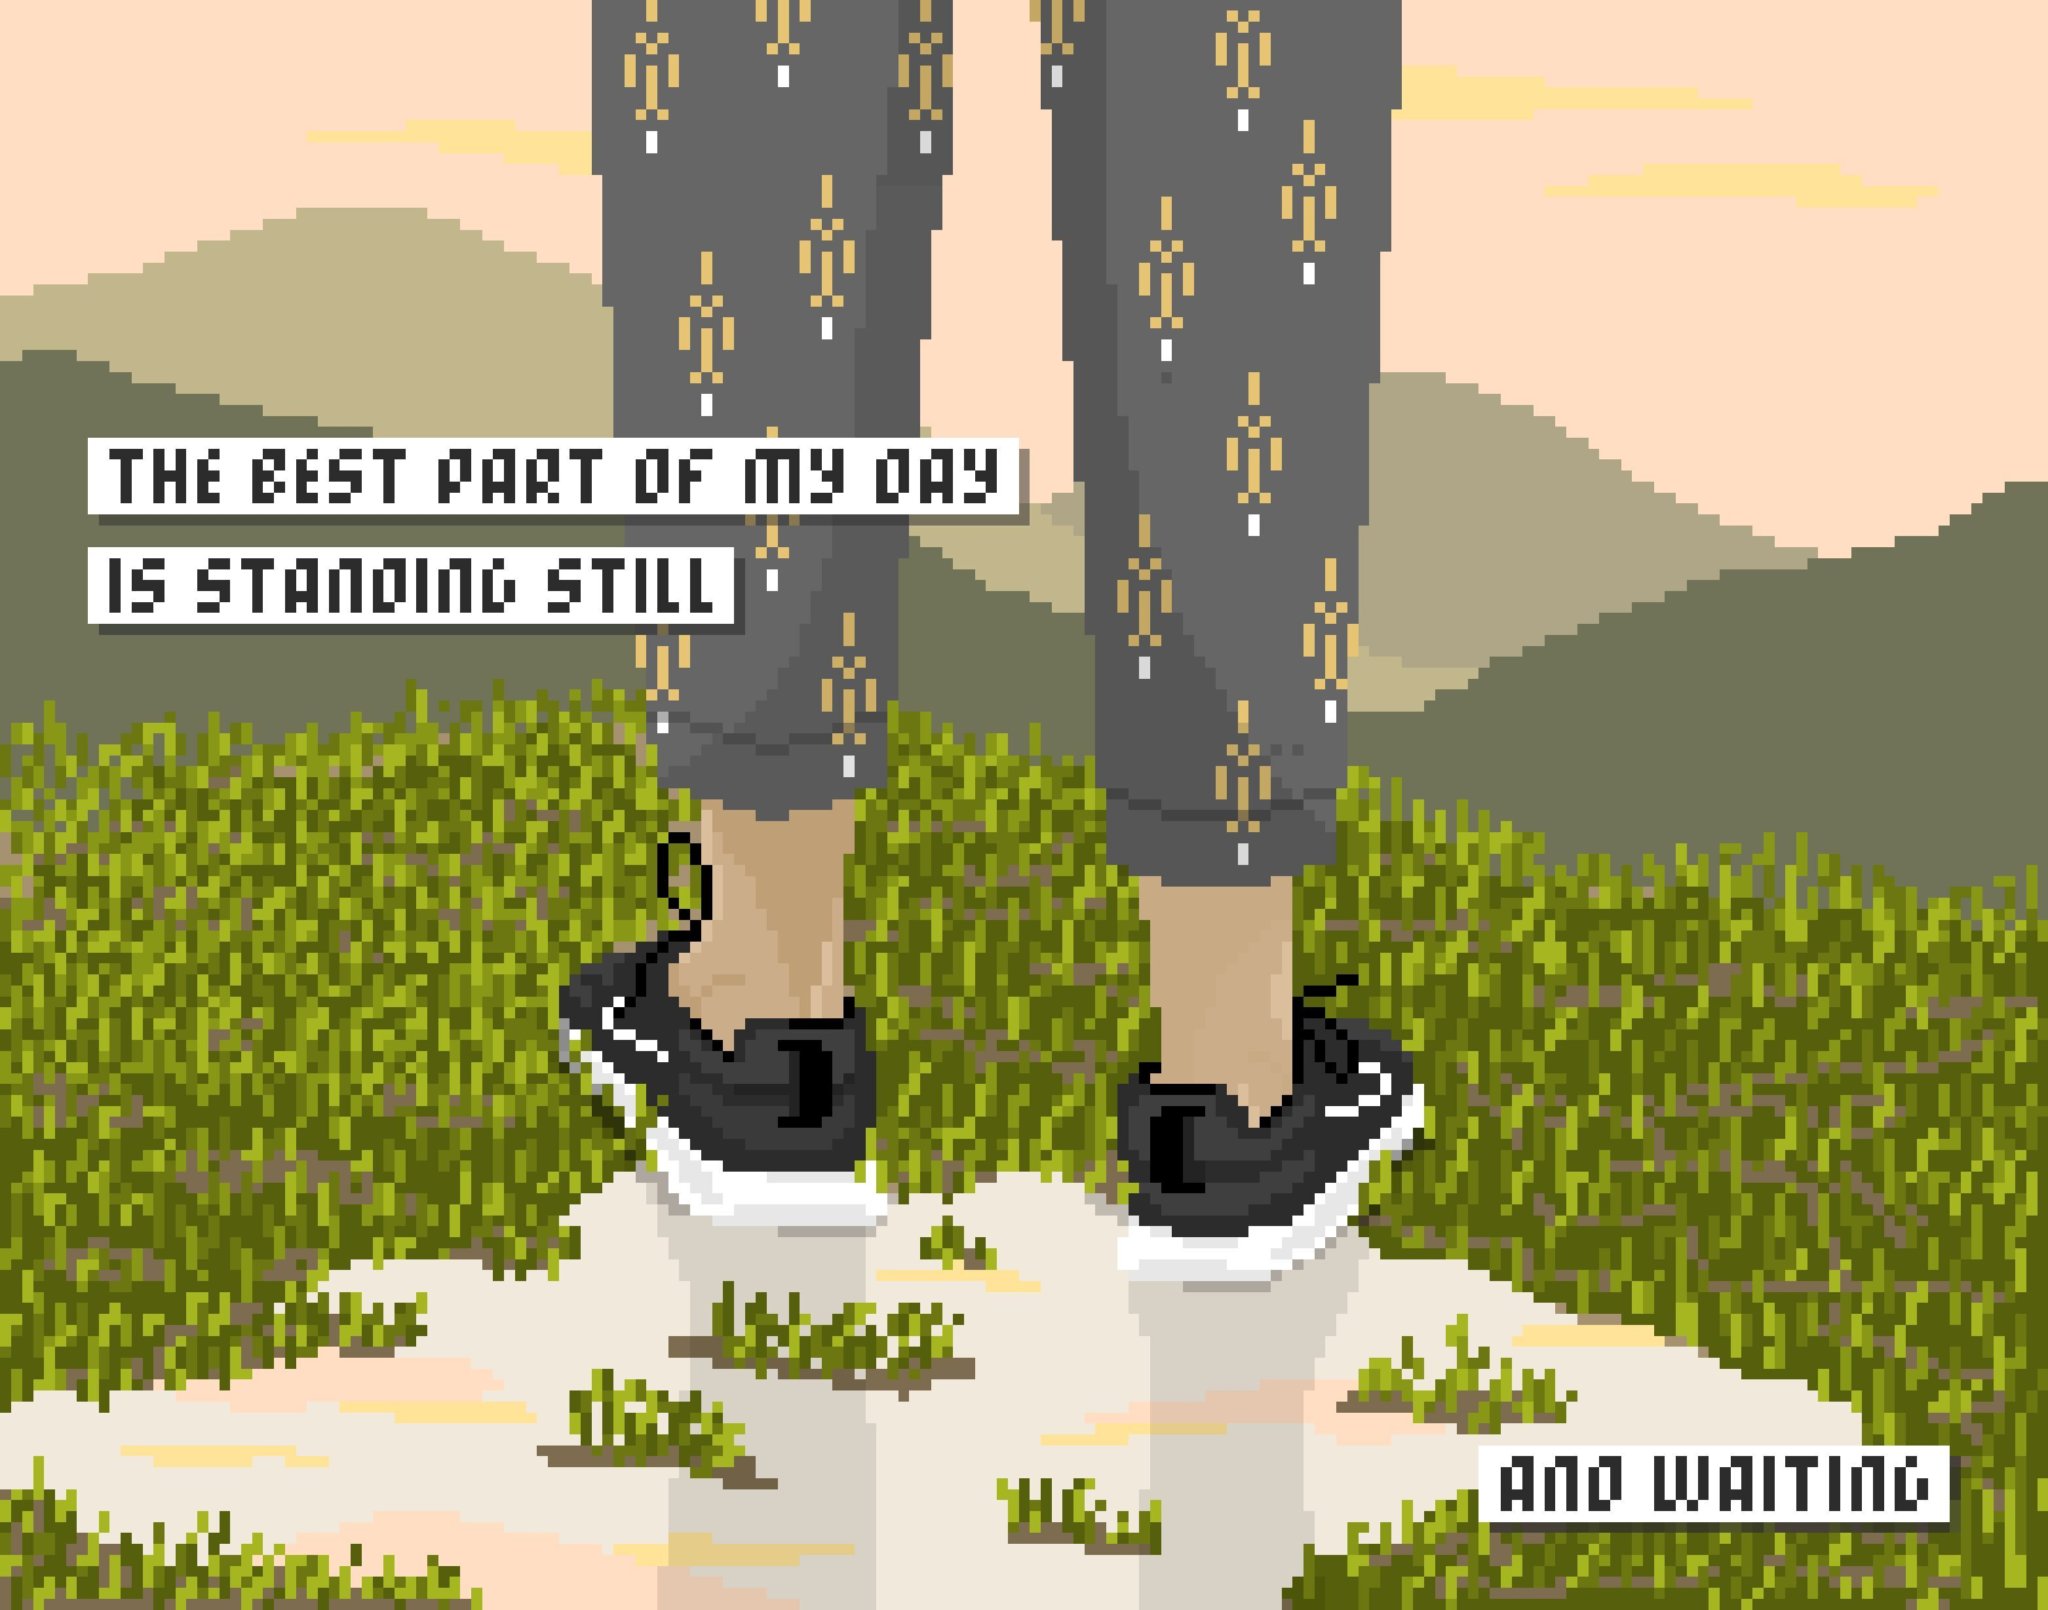 an illustration of a person's legs from behind standing in grass looking at mountains with the text "The best part of my day is standing still and waiting"